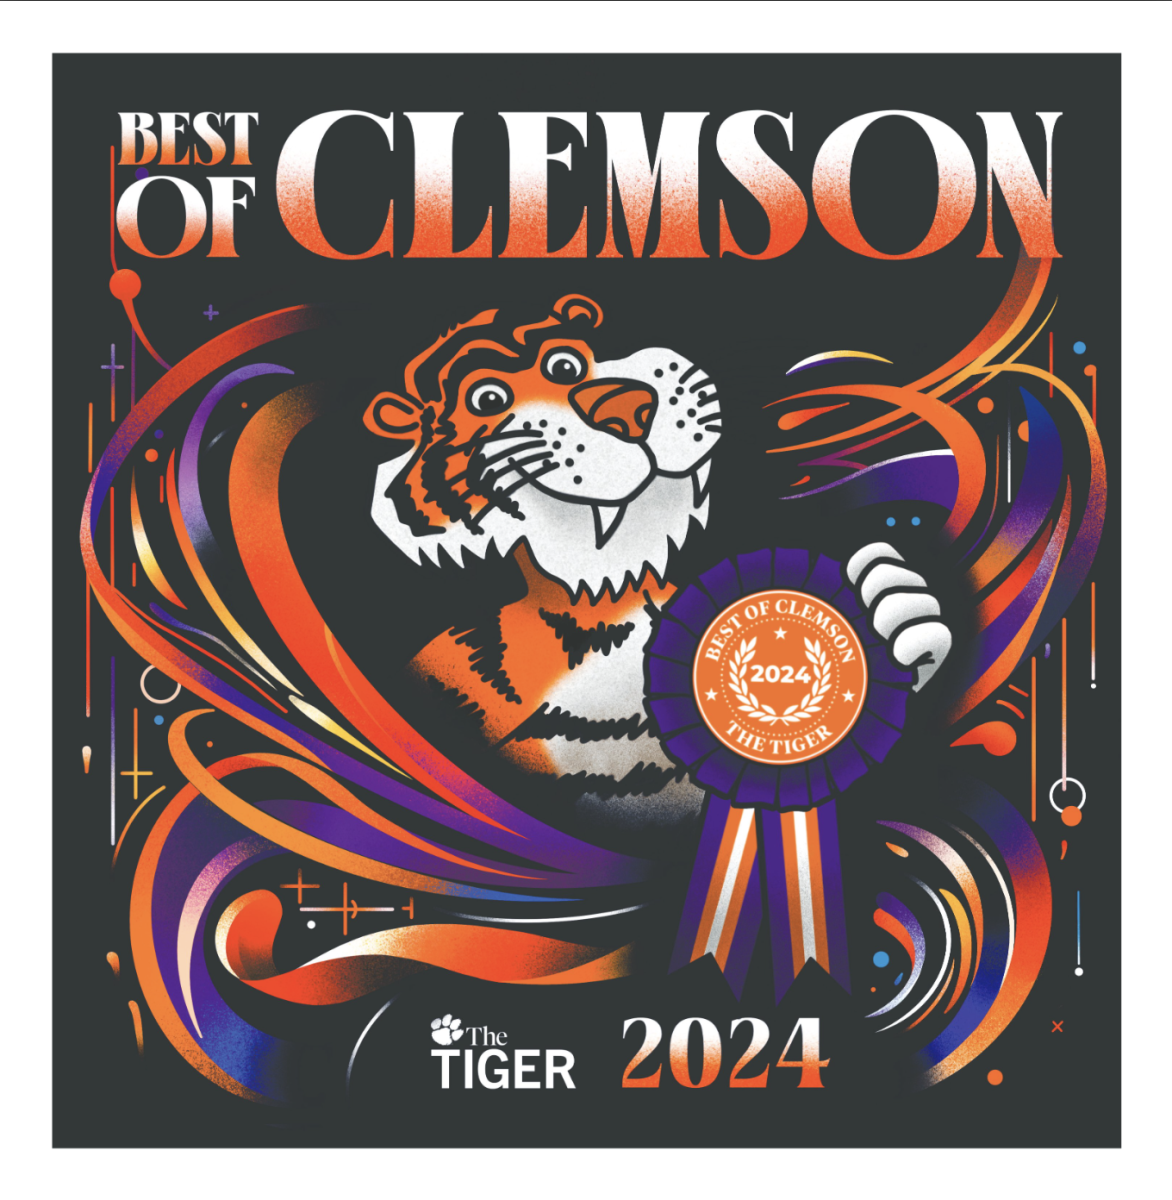 Best of Clemson is an annual contest hosted by The Tiger where the local community votes for their favorite businesses, stores, people and more.